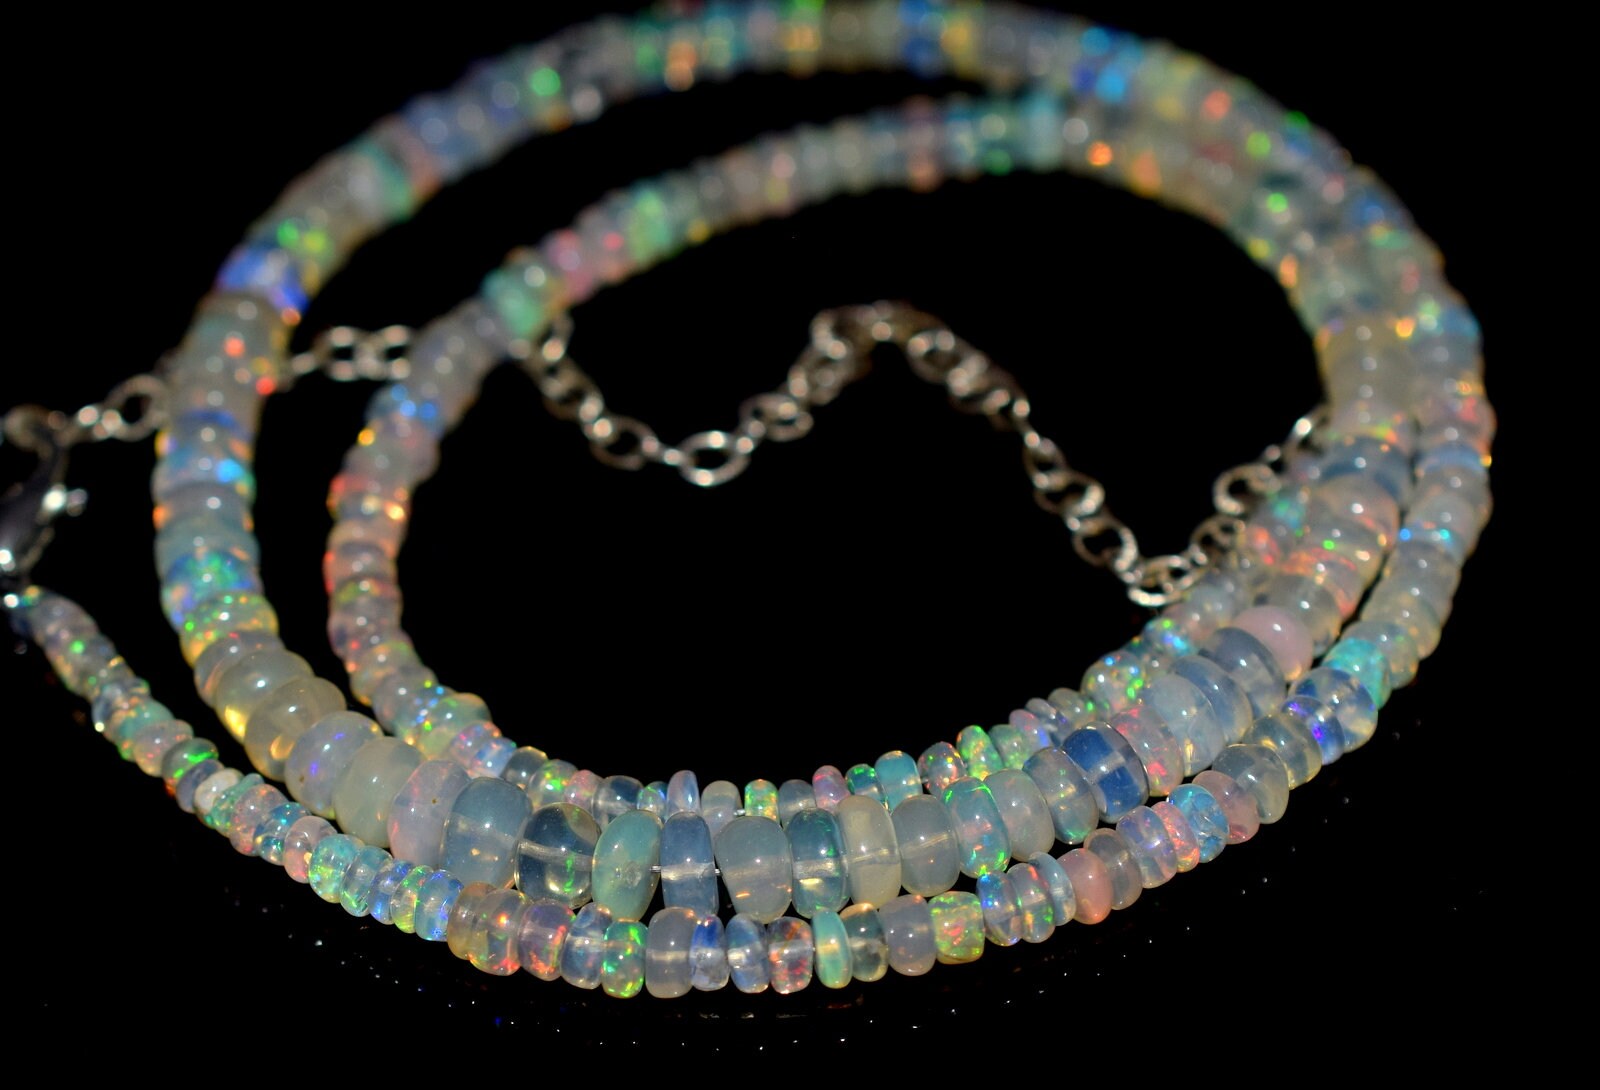 BESTSELLER Top Quality Ethiopian Opal necklaces Smooth Rondelle Beads Size 2x4 MM Ct 32 Ethiopian 16 Inch Opal necklaces  Beads Opal Beads